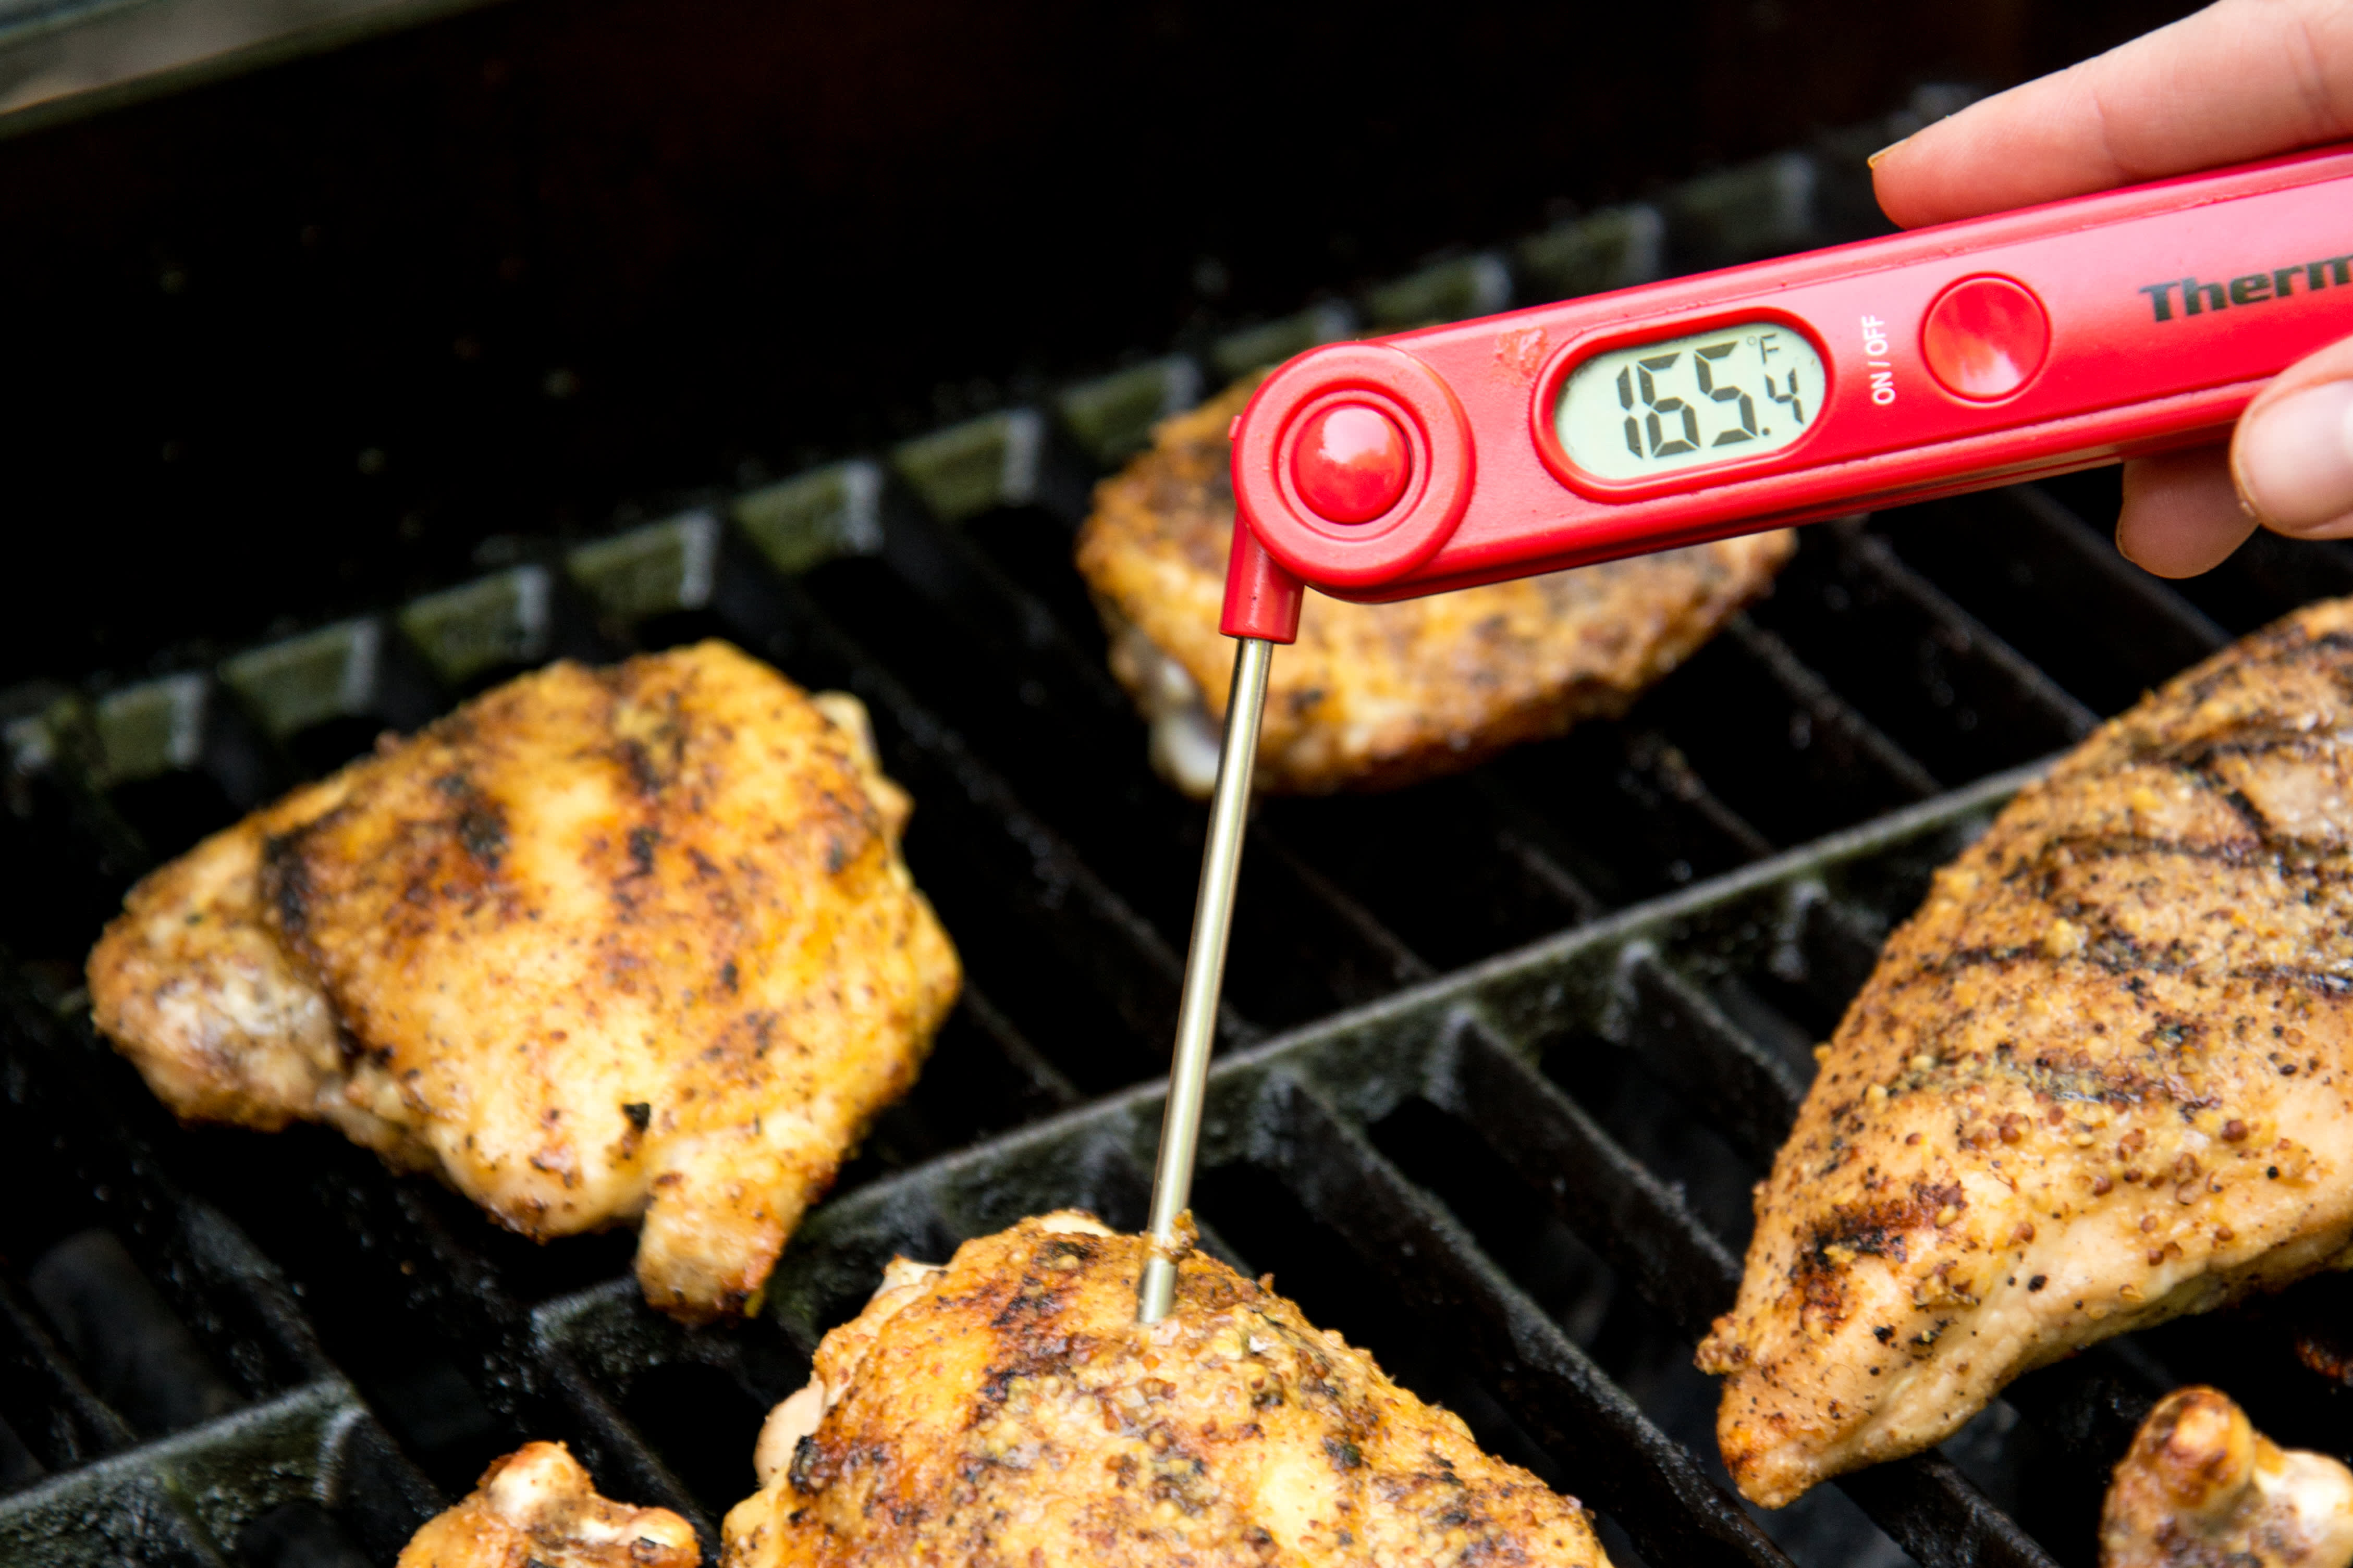 The Best Probe Thermometer: Thermoworks Dot Review 2019